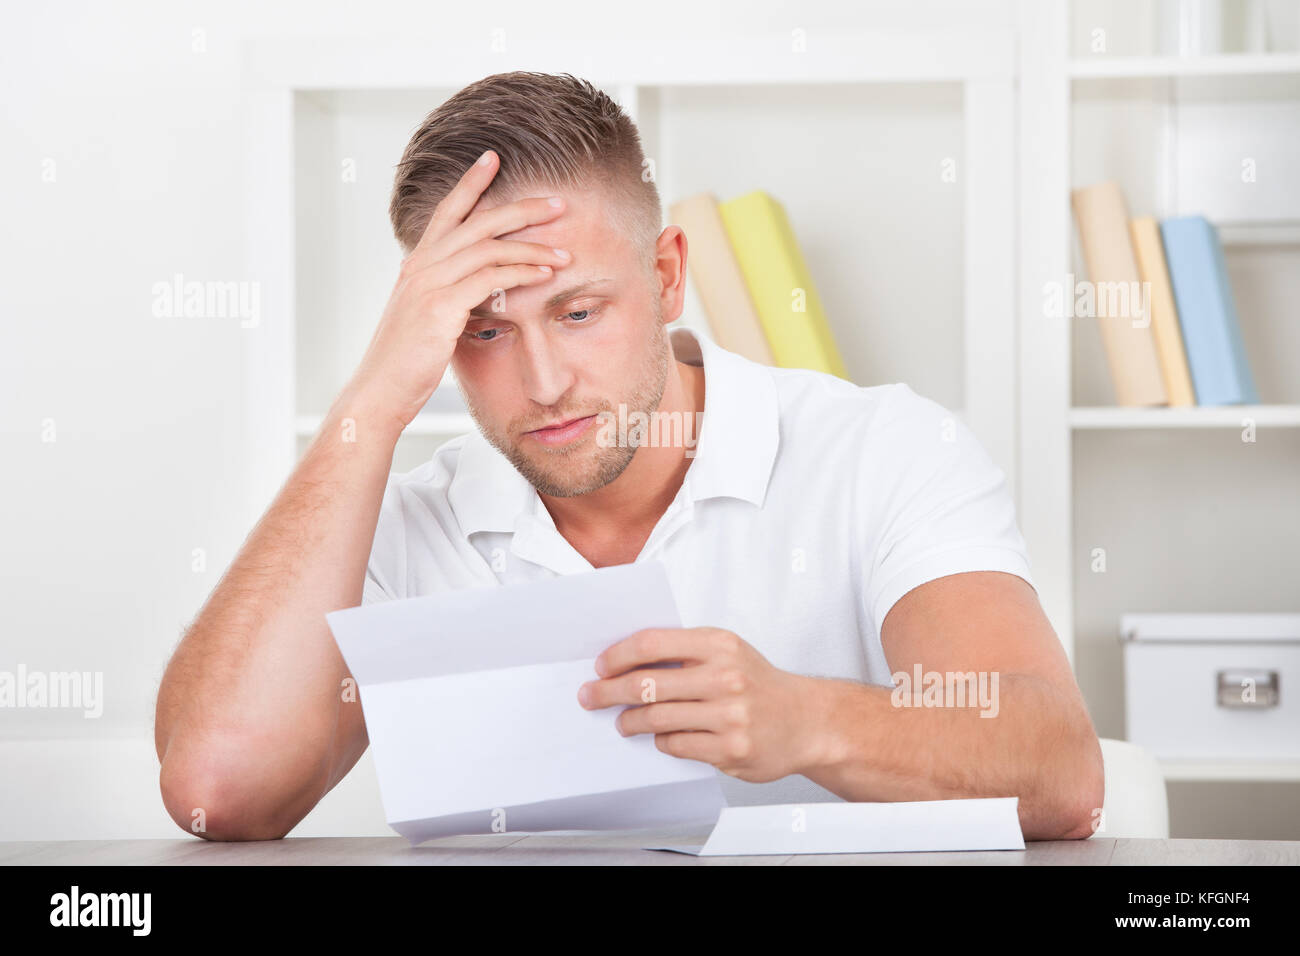 Businessman sitting in an office reacting in shock to the contents of a letter that he is reading raising his hand to his mouth Stock Photo